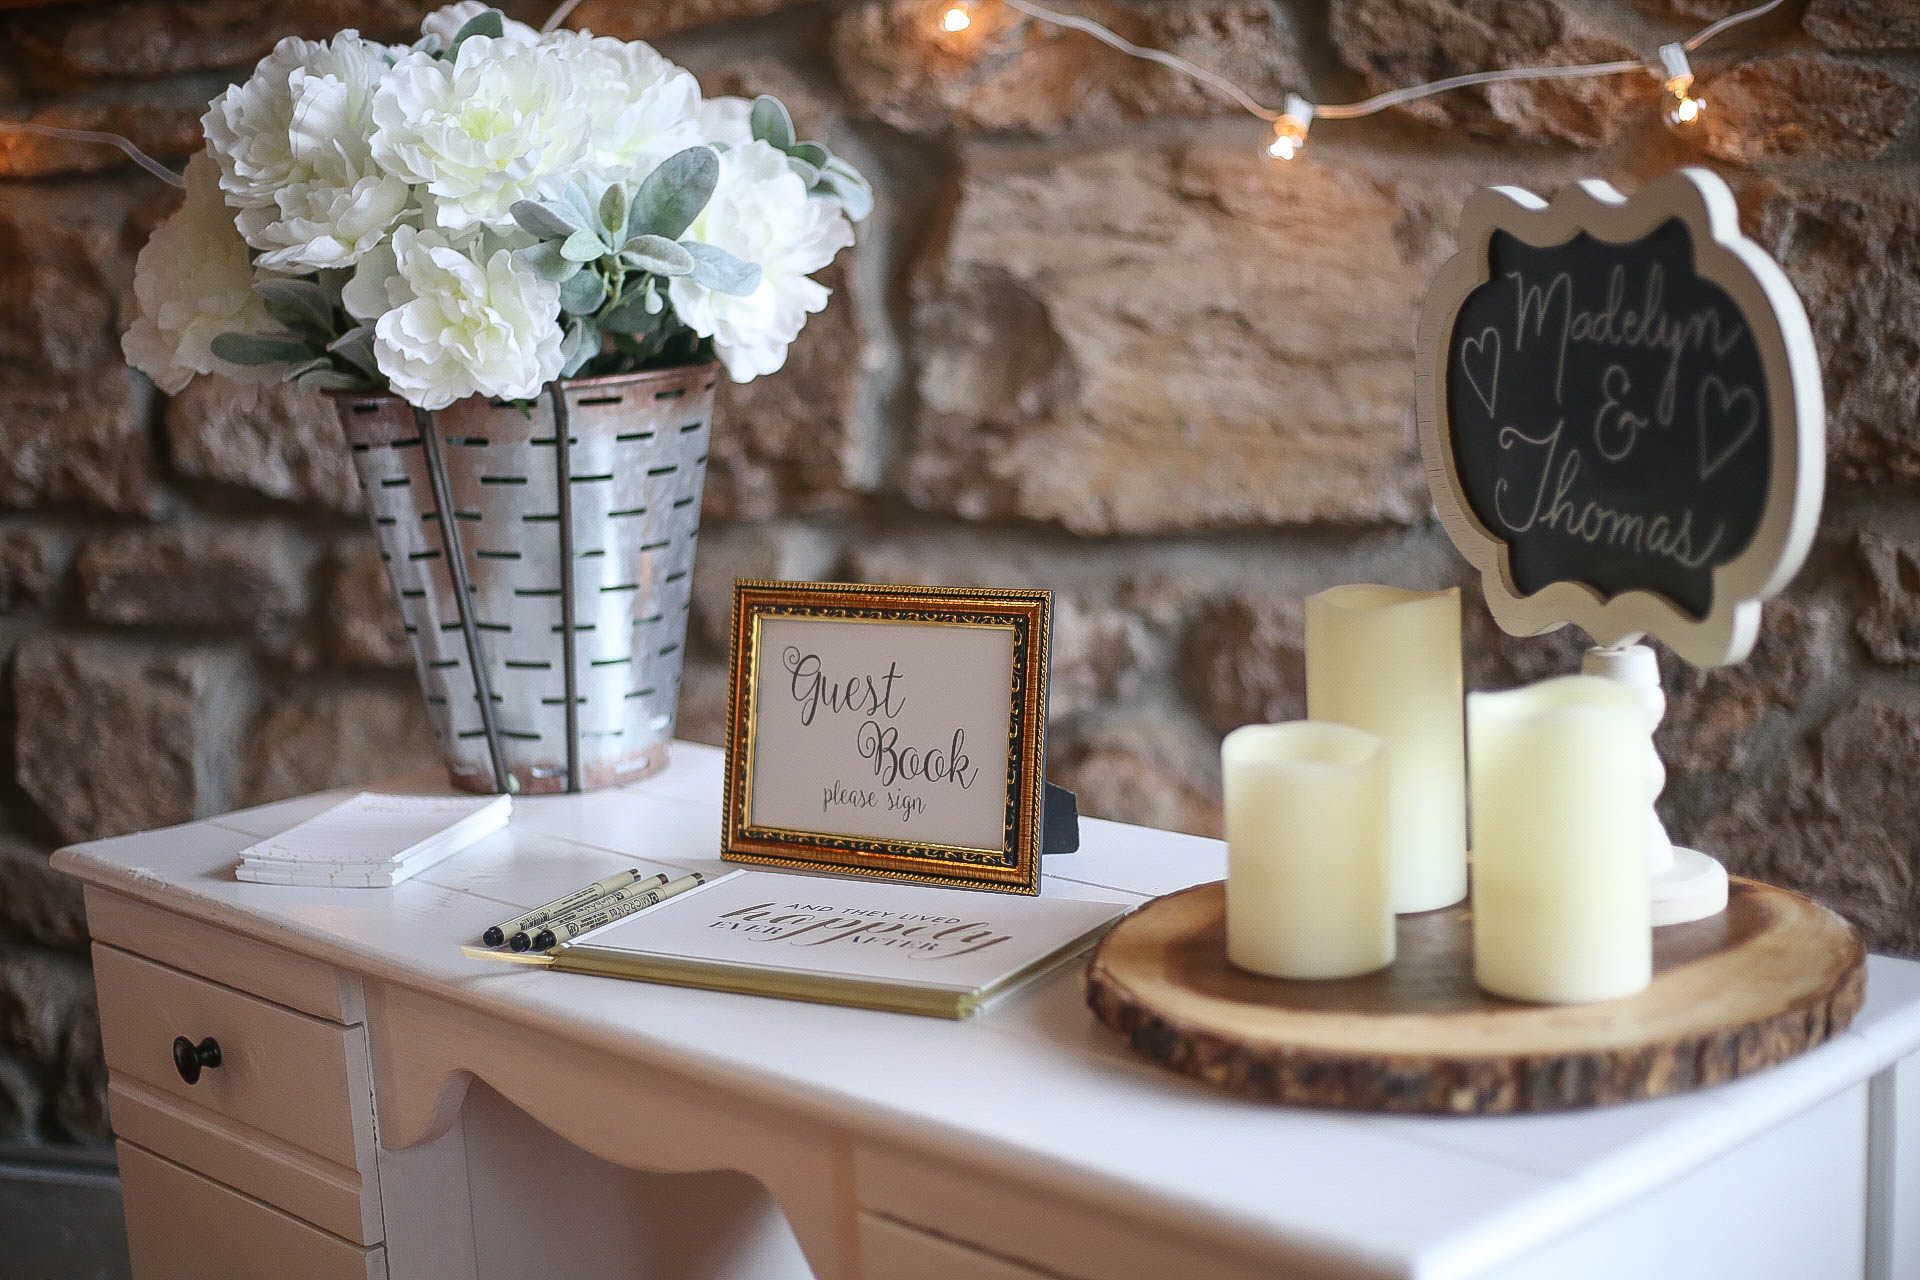 Ranch Wedding: Inspirations and Advice